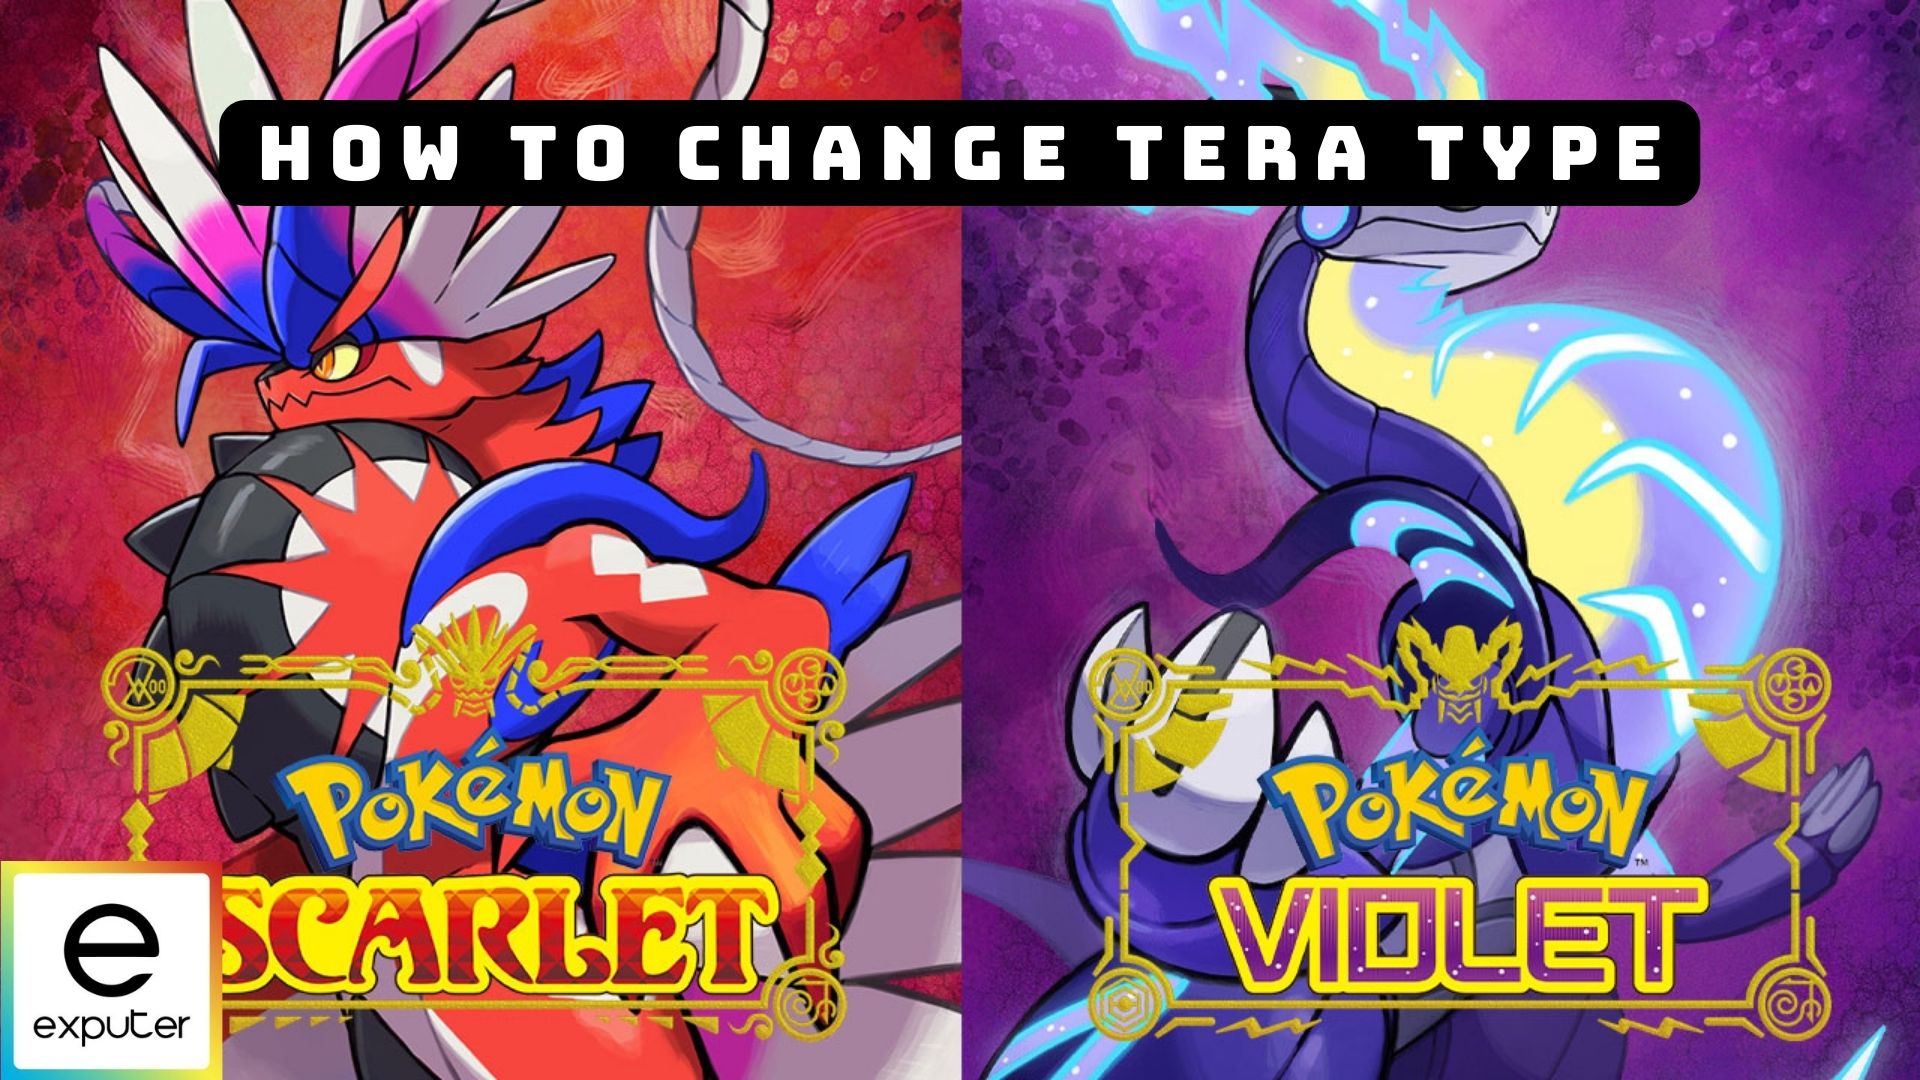 How to Change a Pokemon's Tera Type in Pokémon Scarlet and Violet